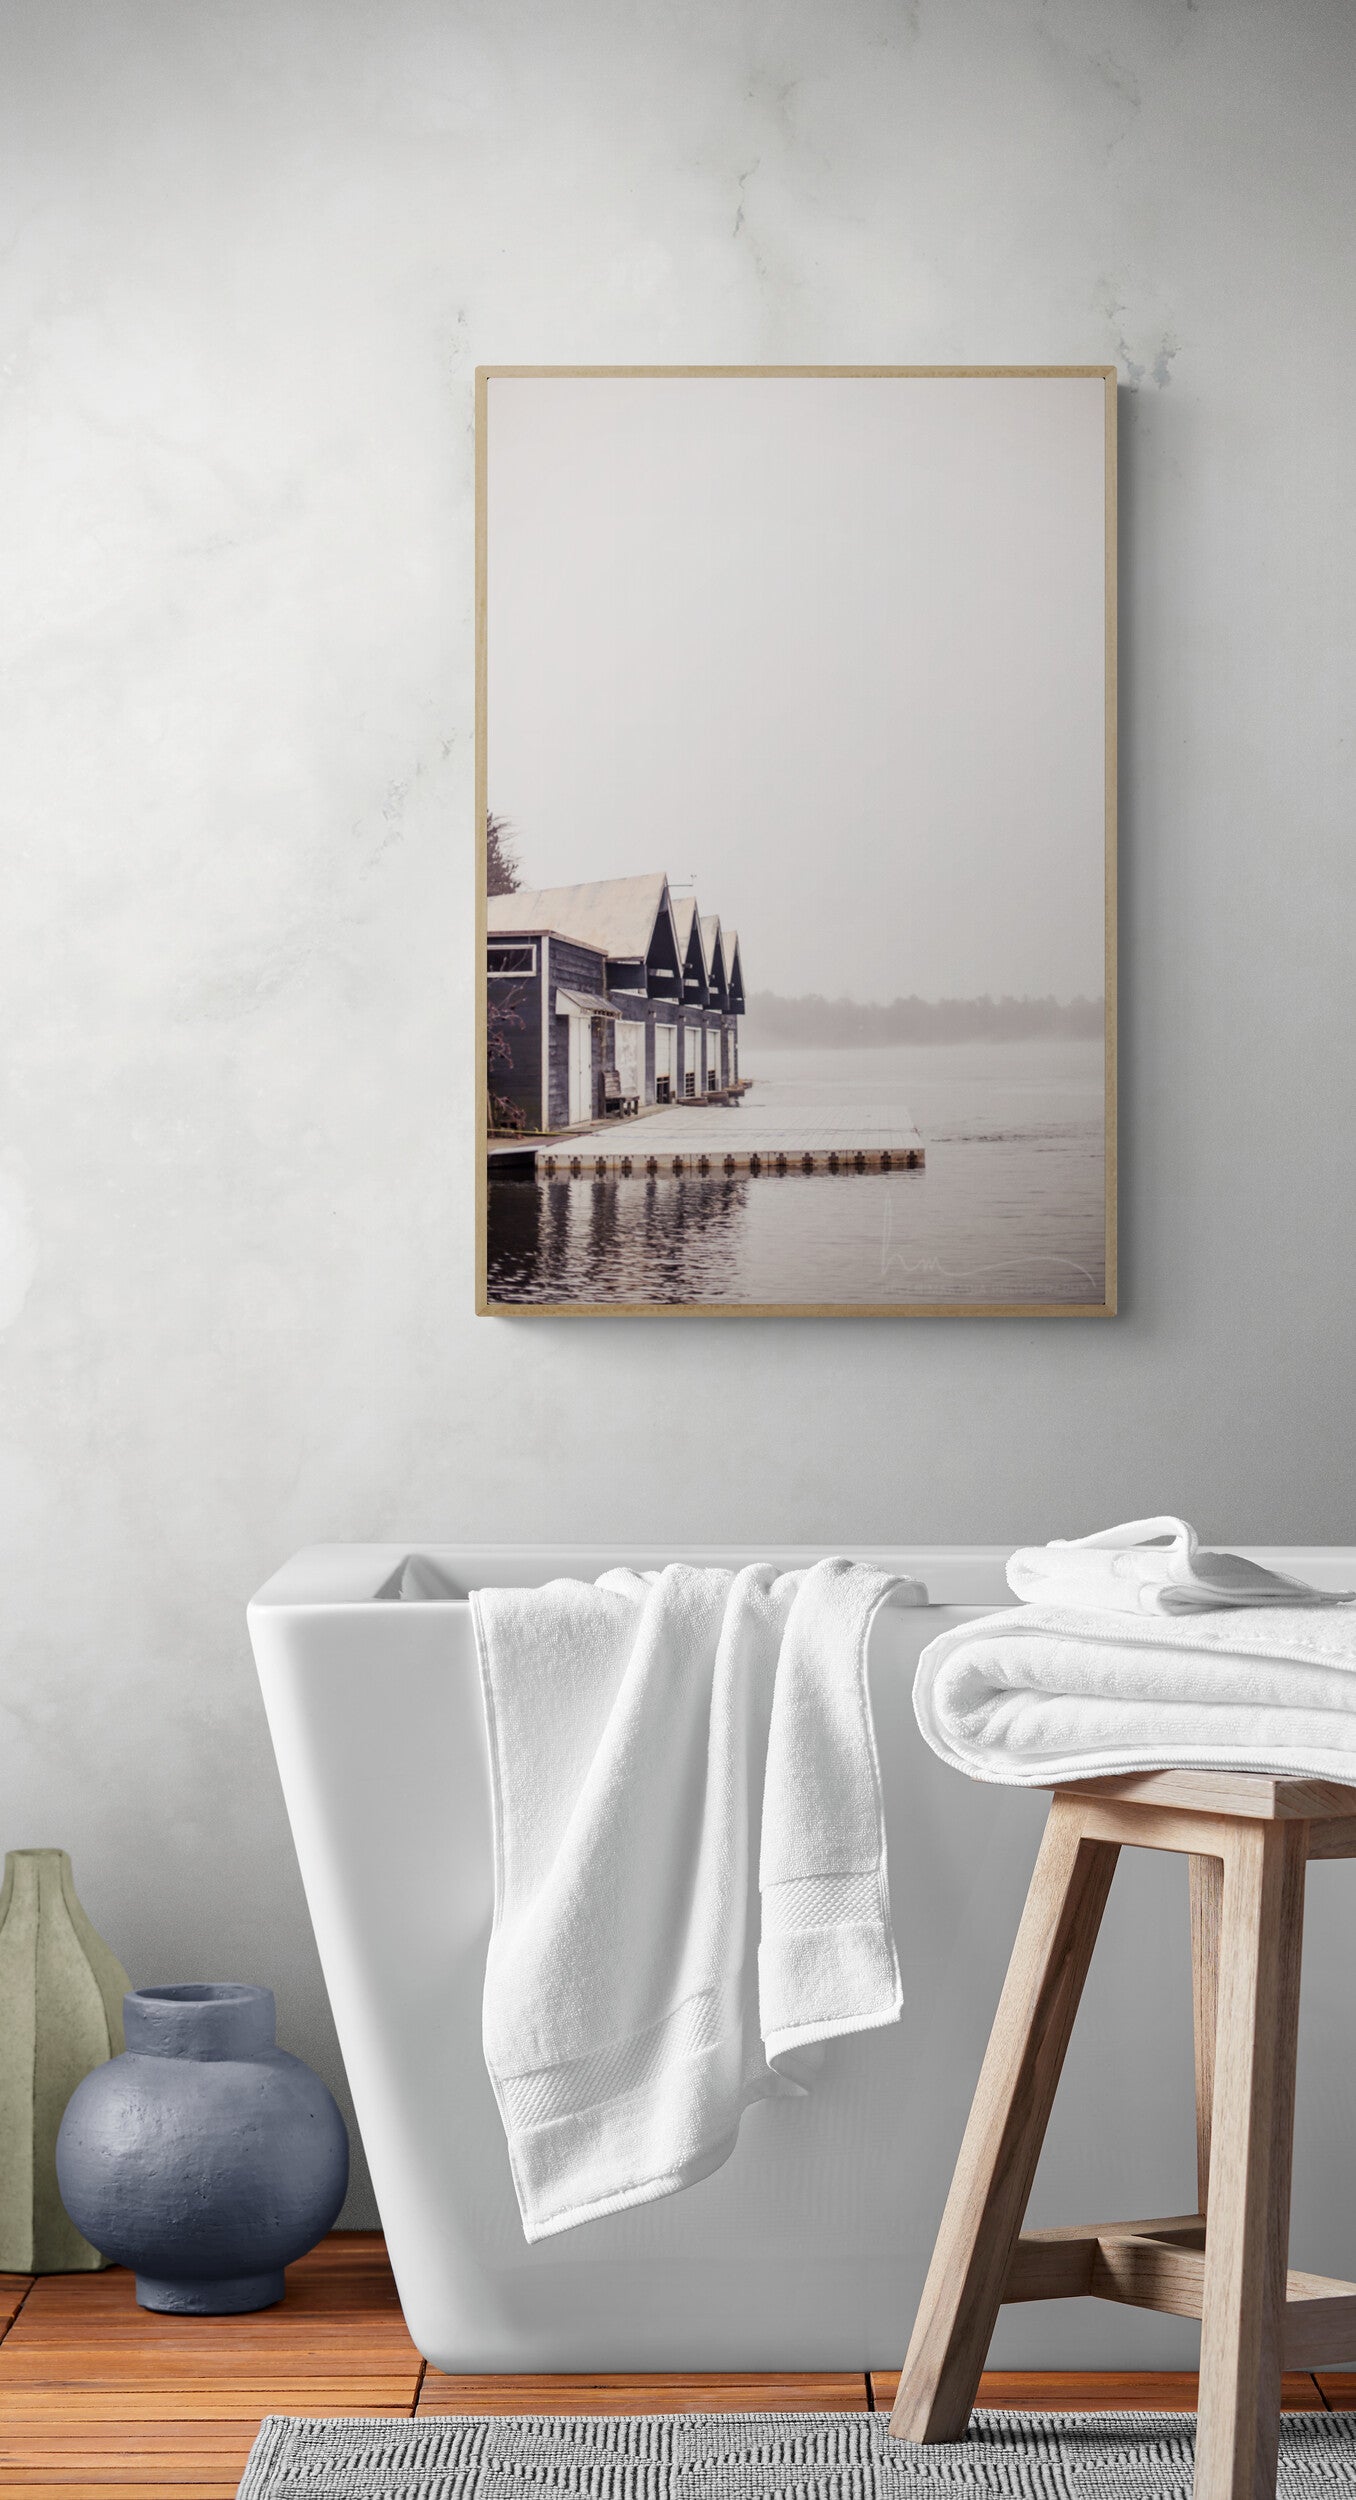 Boathouse on a lake photograph in a bathroom as wall art